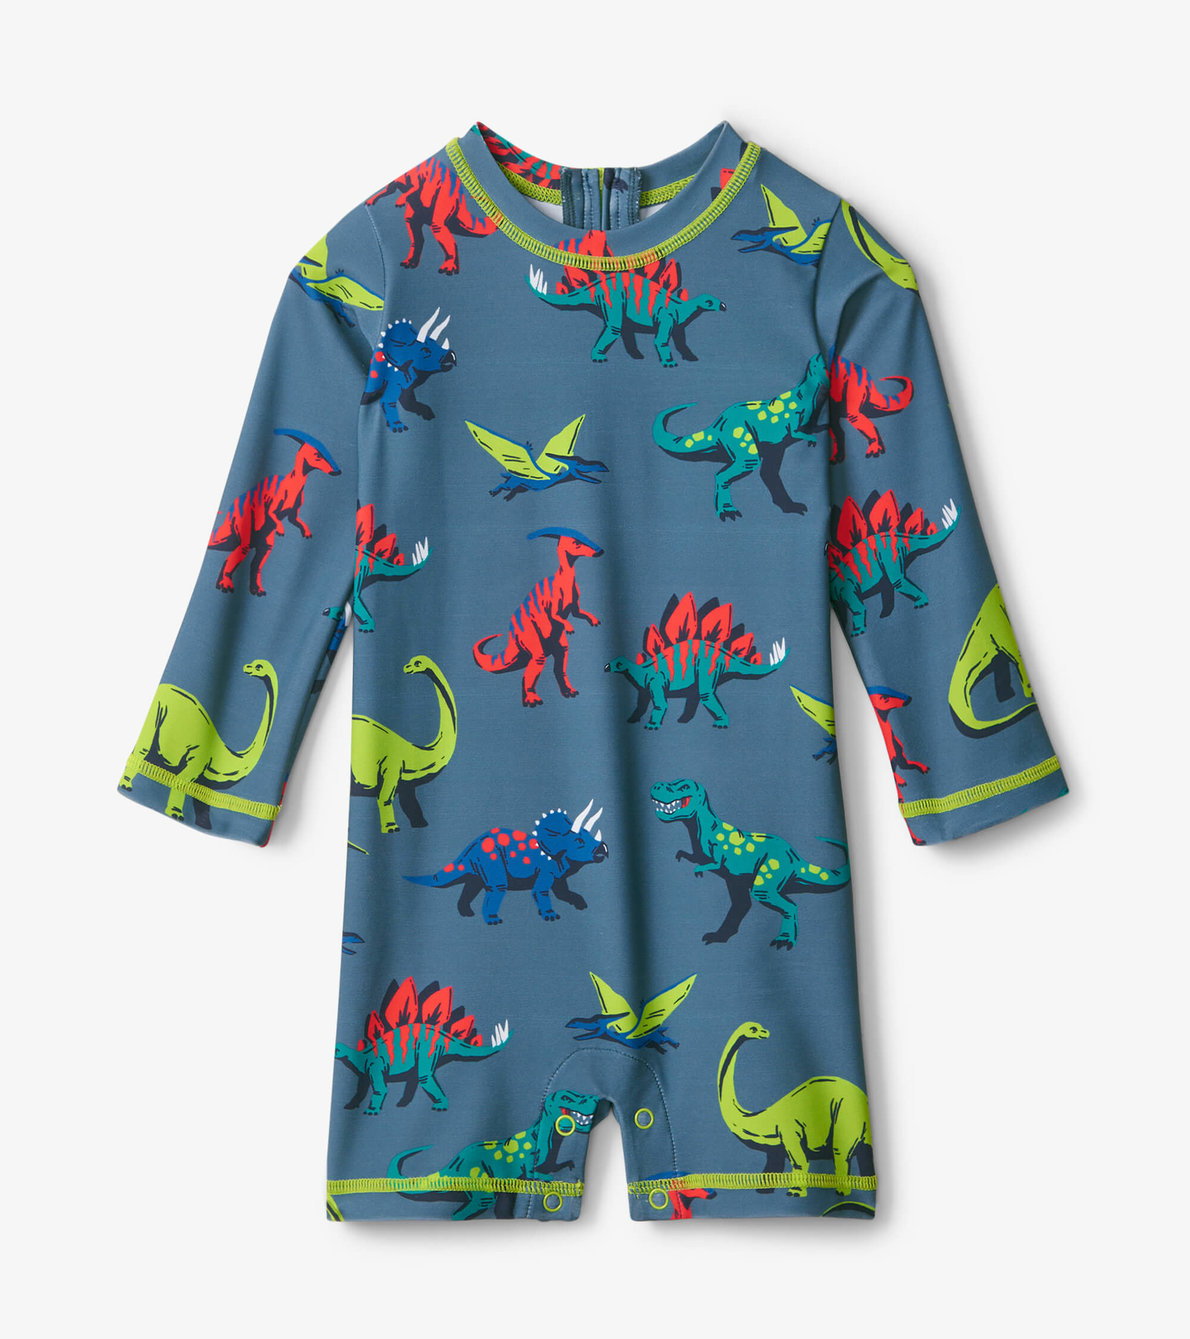 View larger image of Dangerous Dinos Baby One-Piece Rashguard